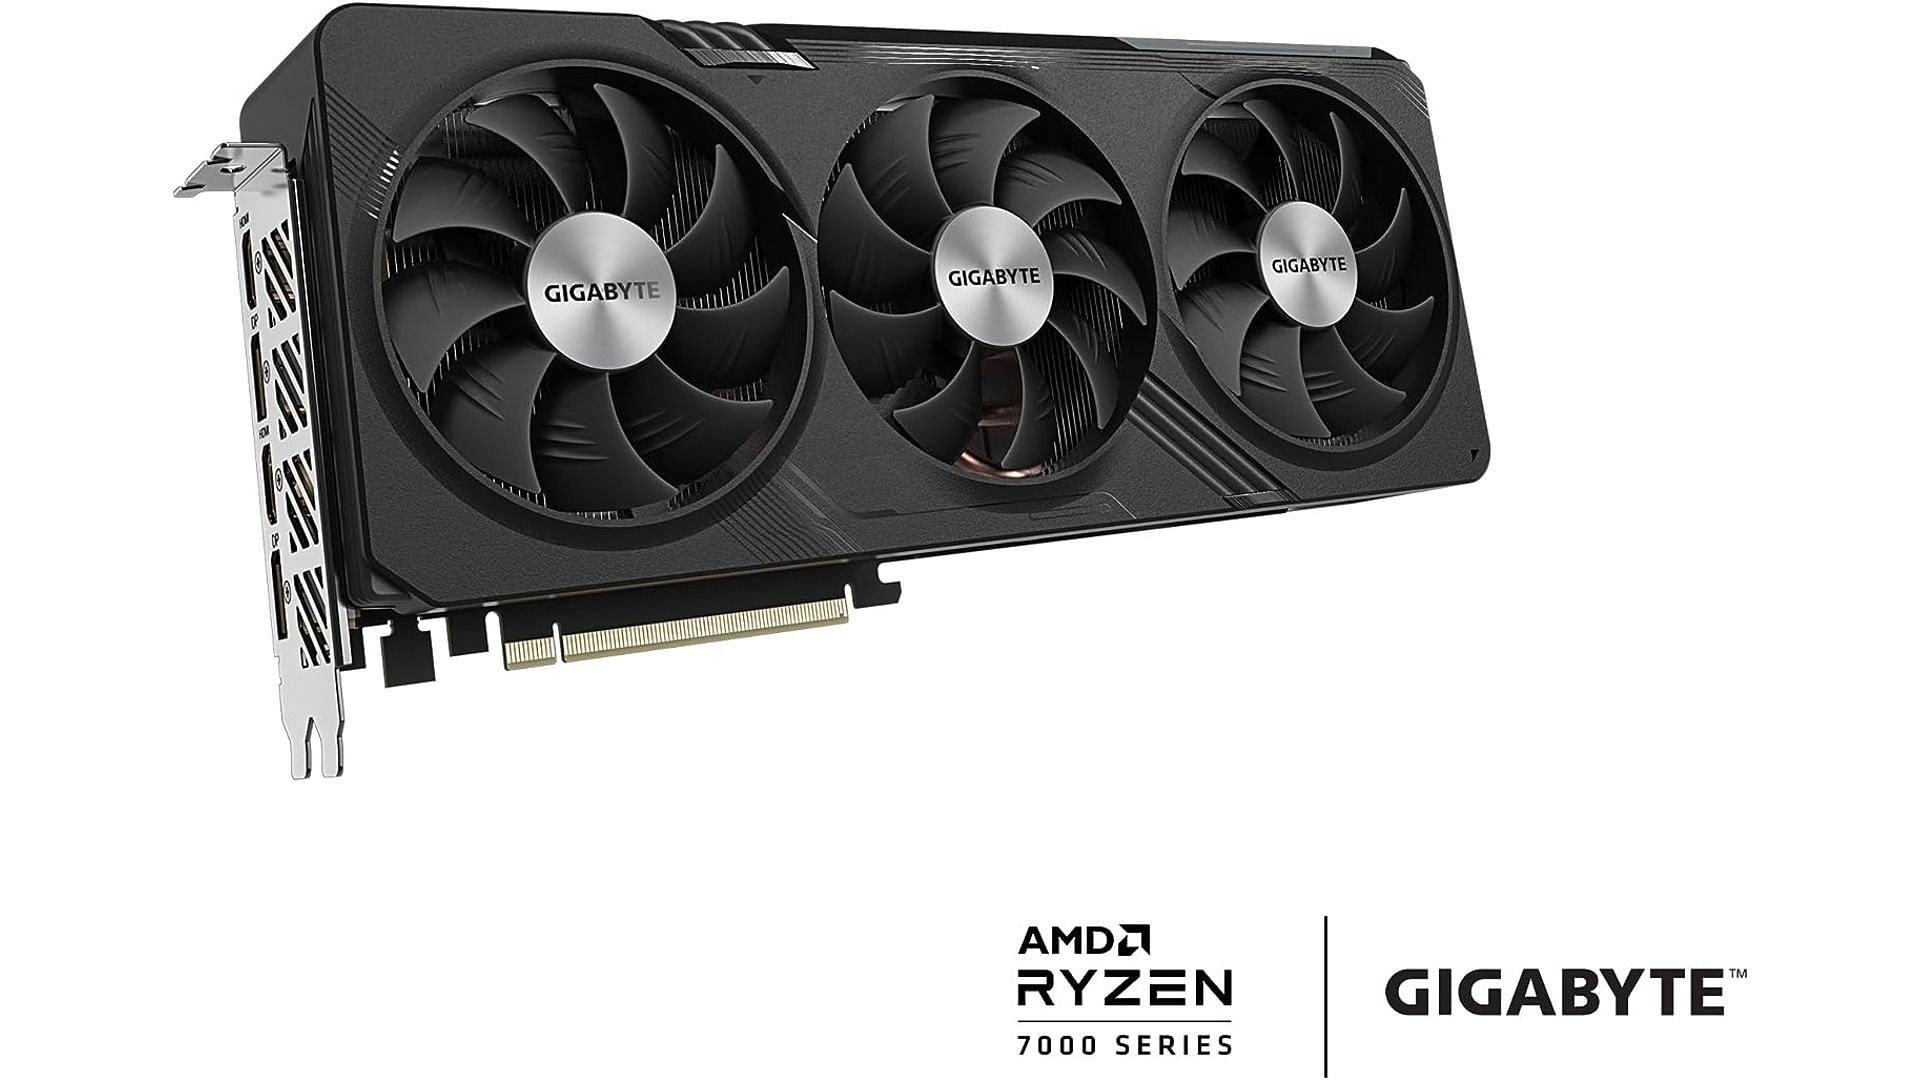 AMD RX 7700 XT comes with 12 GB of Video memory (Image by Gigabyte)